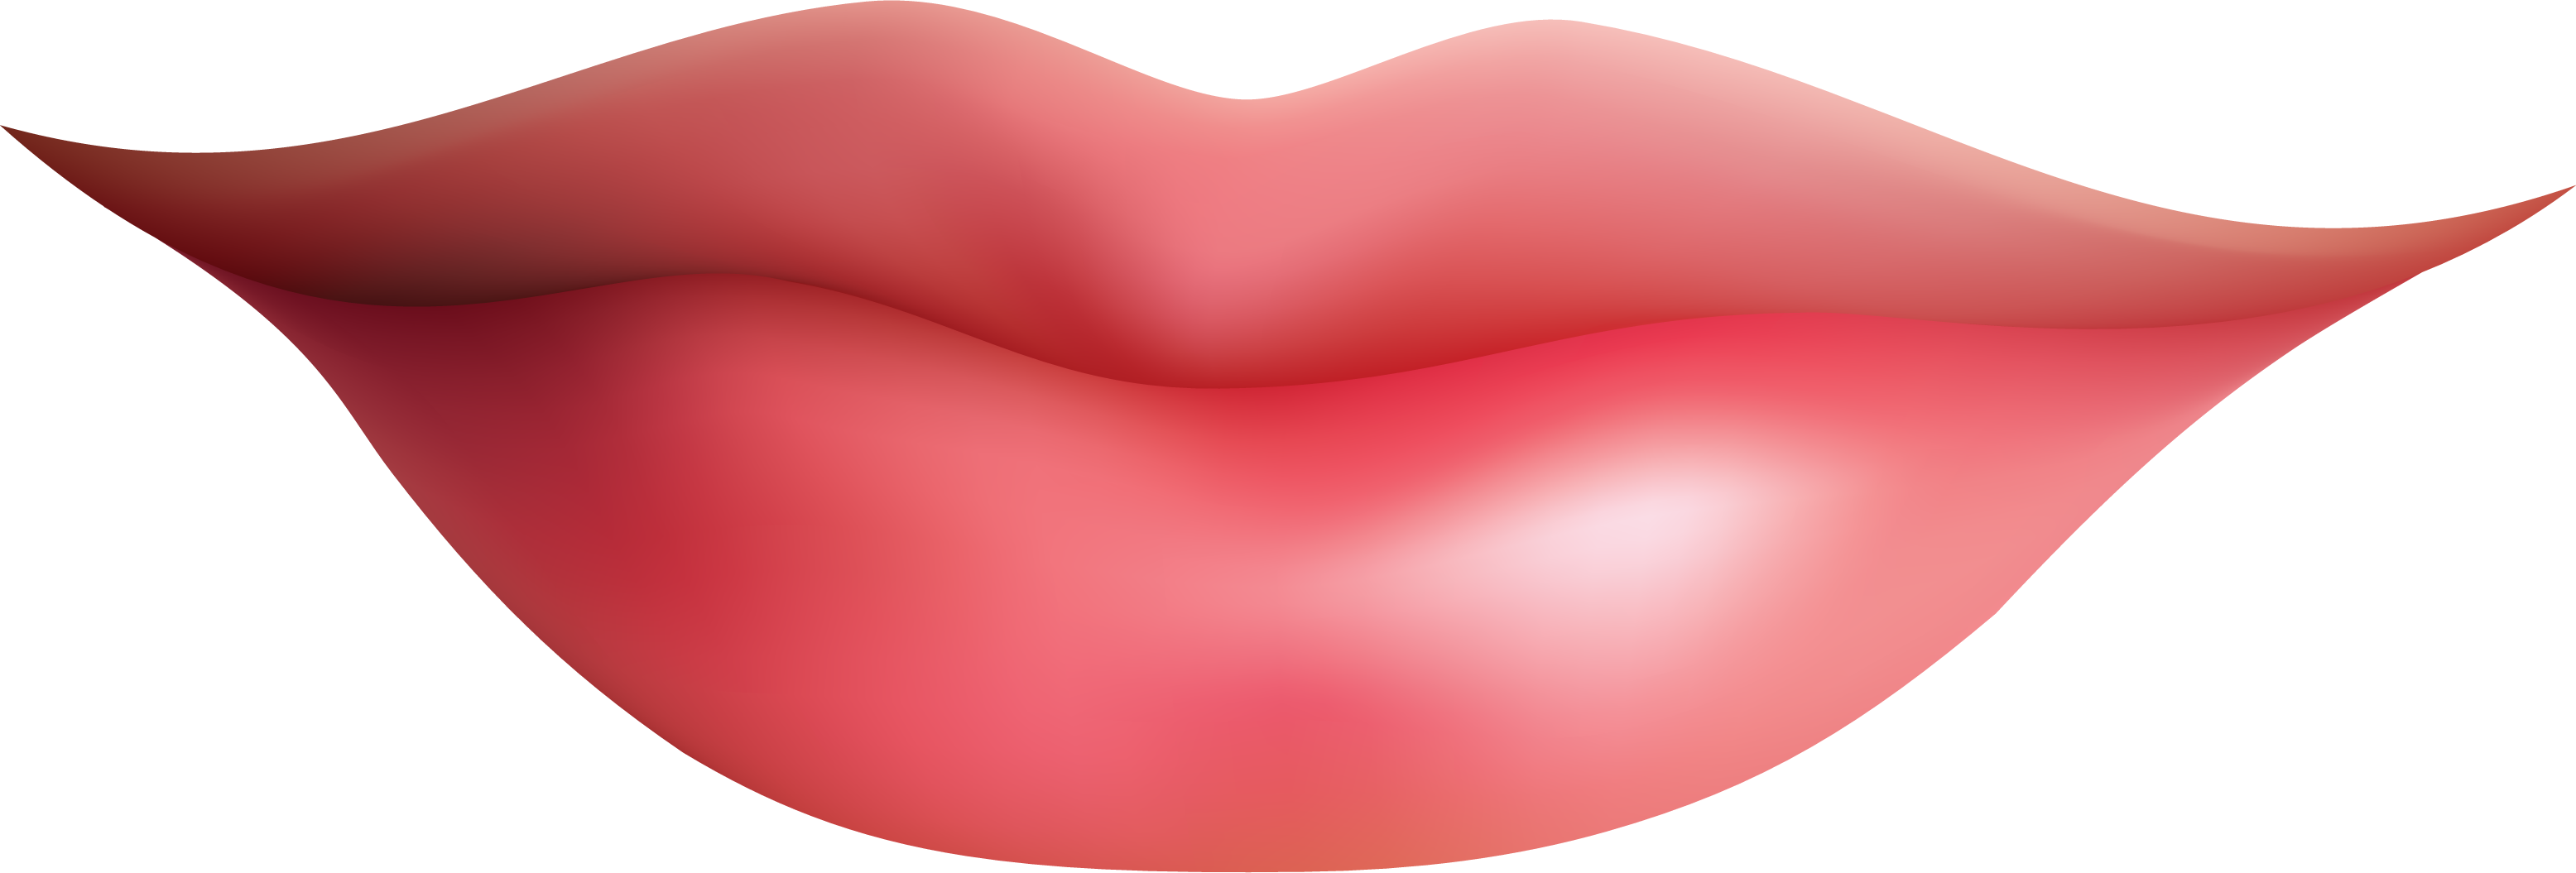 Lips Free PNG